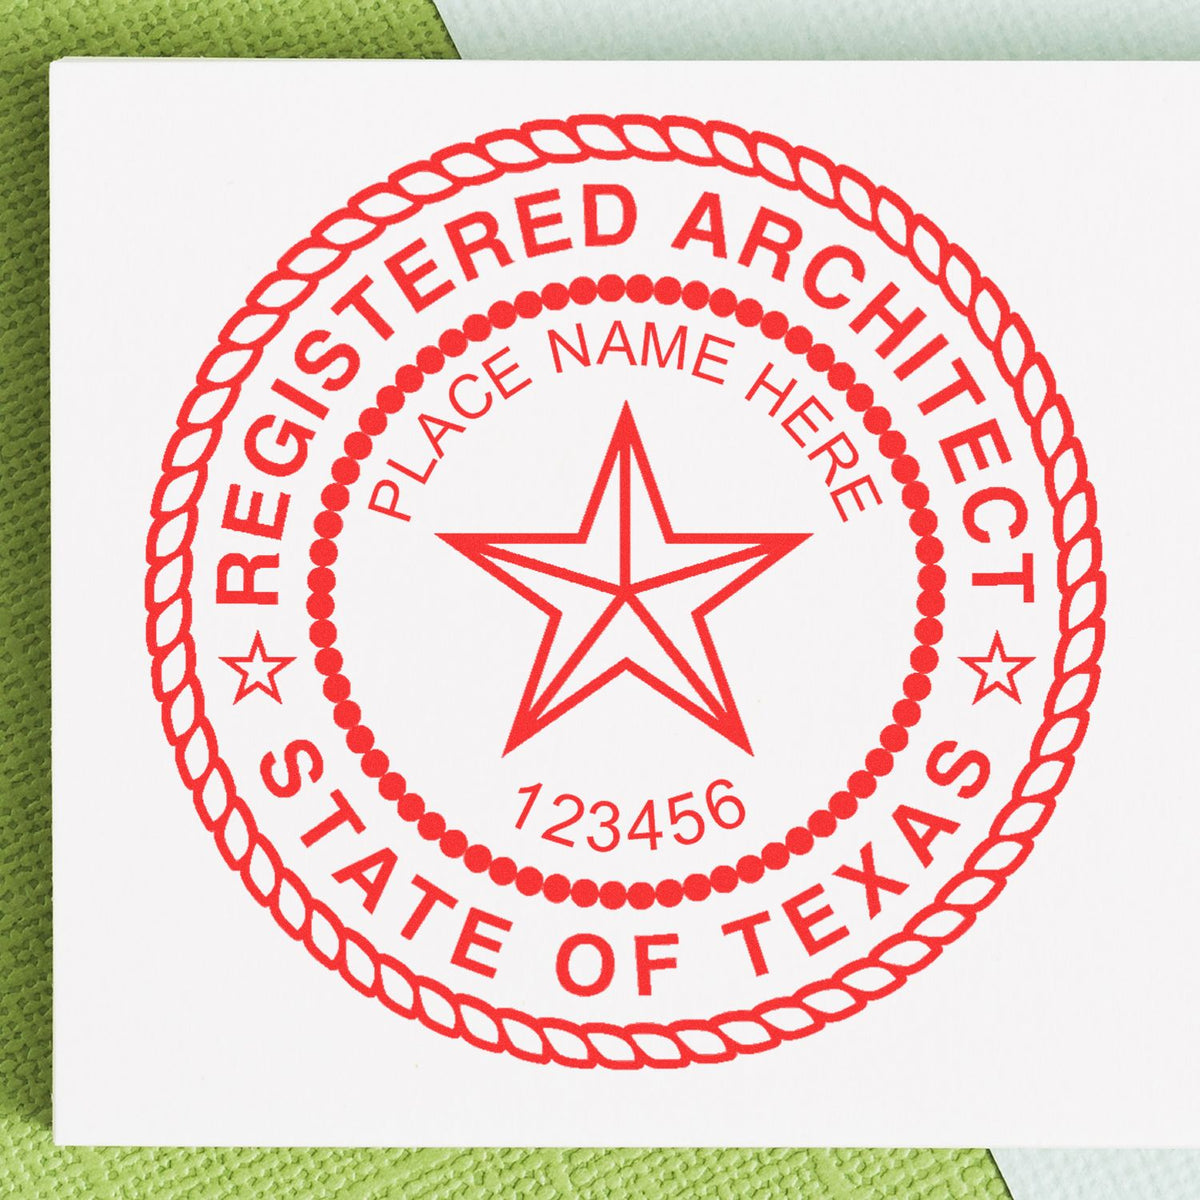 Slim Pre-Inked Texas Architect Seal Stamp in use photo showing a stamped imprint of the Slim Pre-Inked Texas Architect Seal Stamp